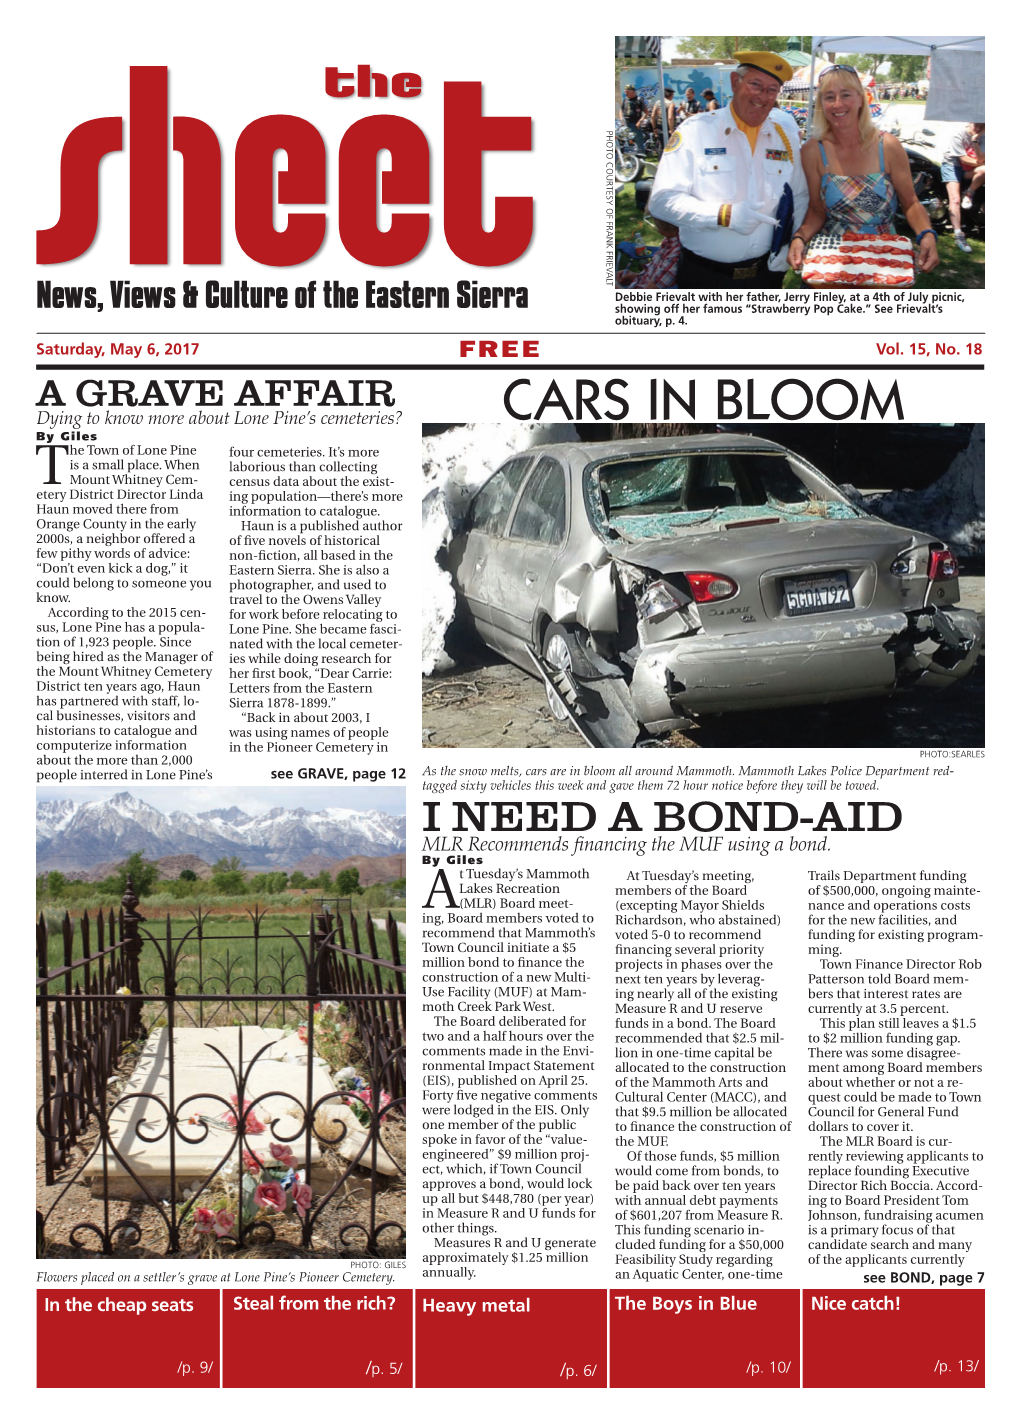 CARS in BLOOM by Giles He Town of Lone Pine Four Cemeteries